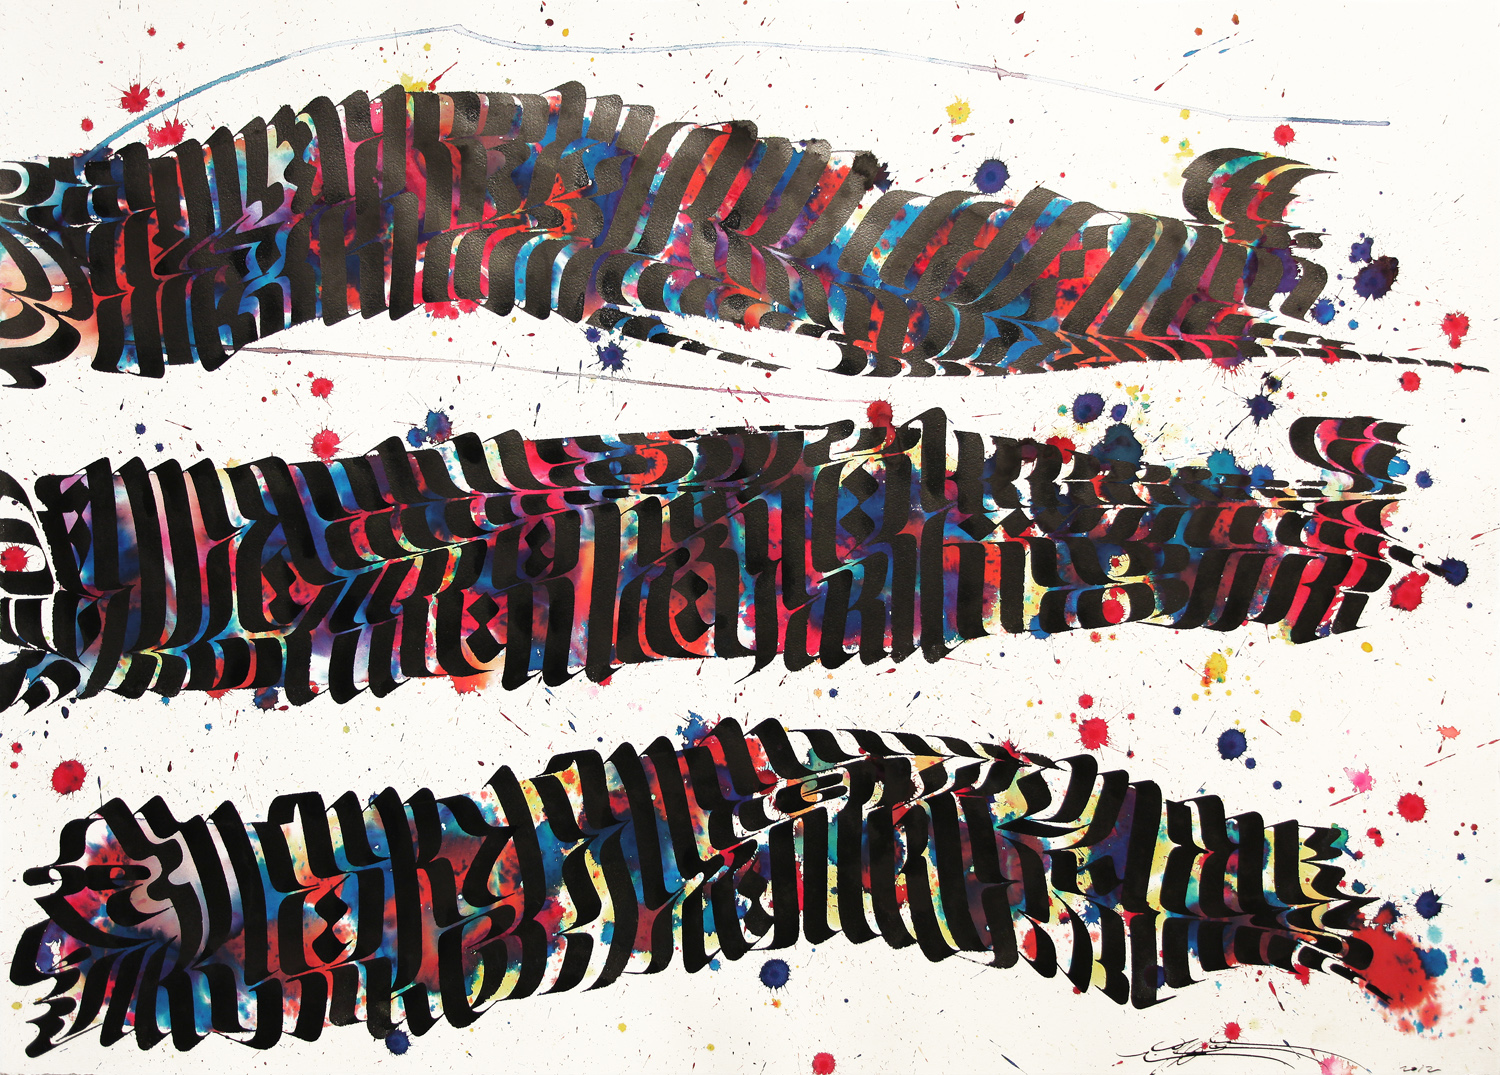  Piscem Modicum (Little Fishes), 2012 sumi and ink on handmade paper 29 x 42 inch 